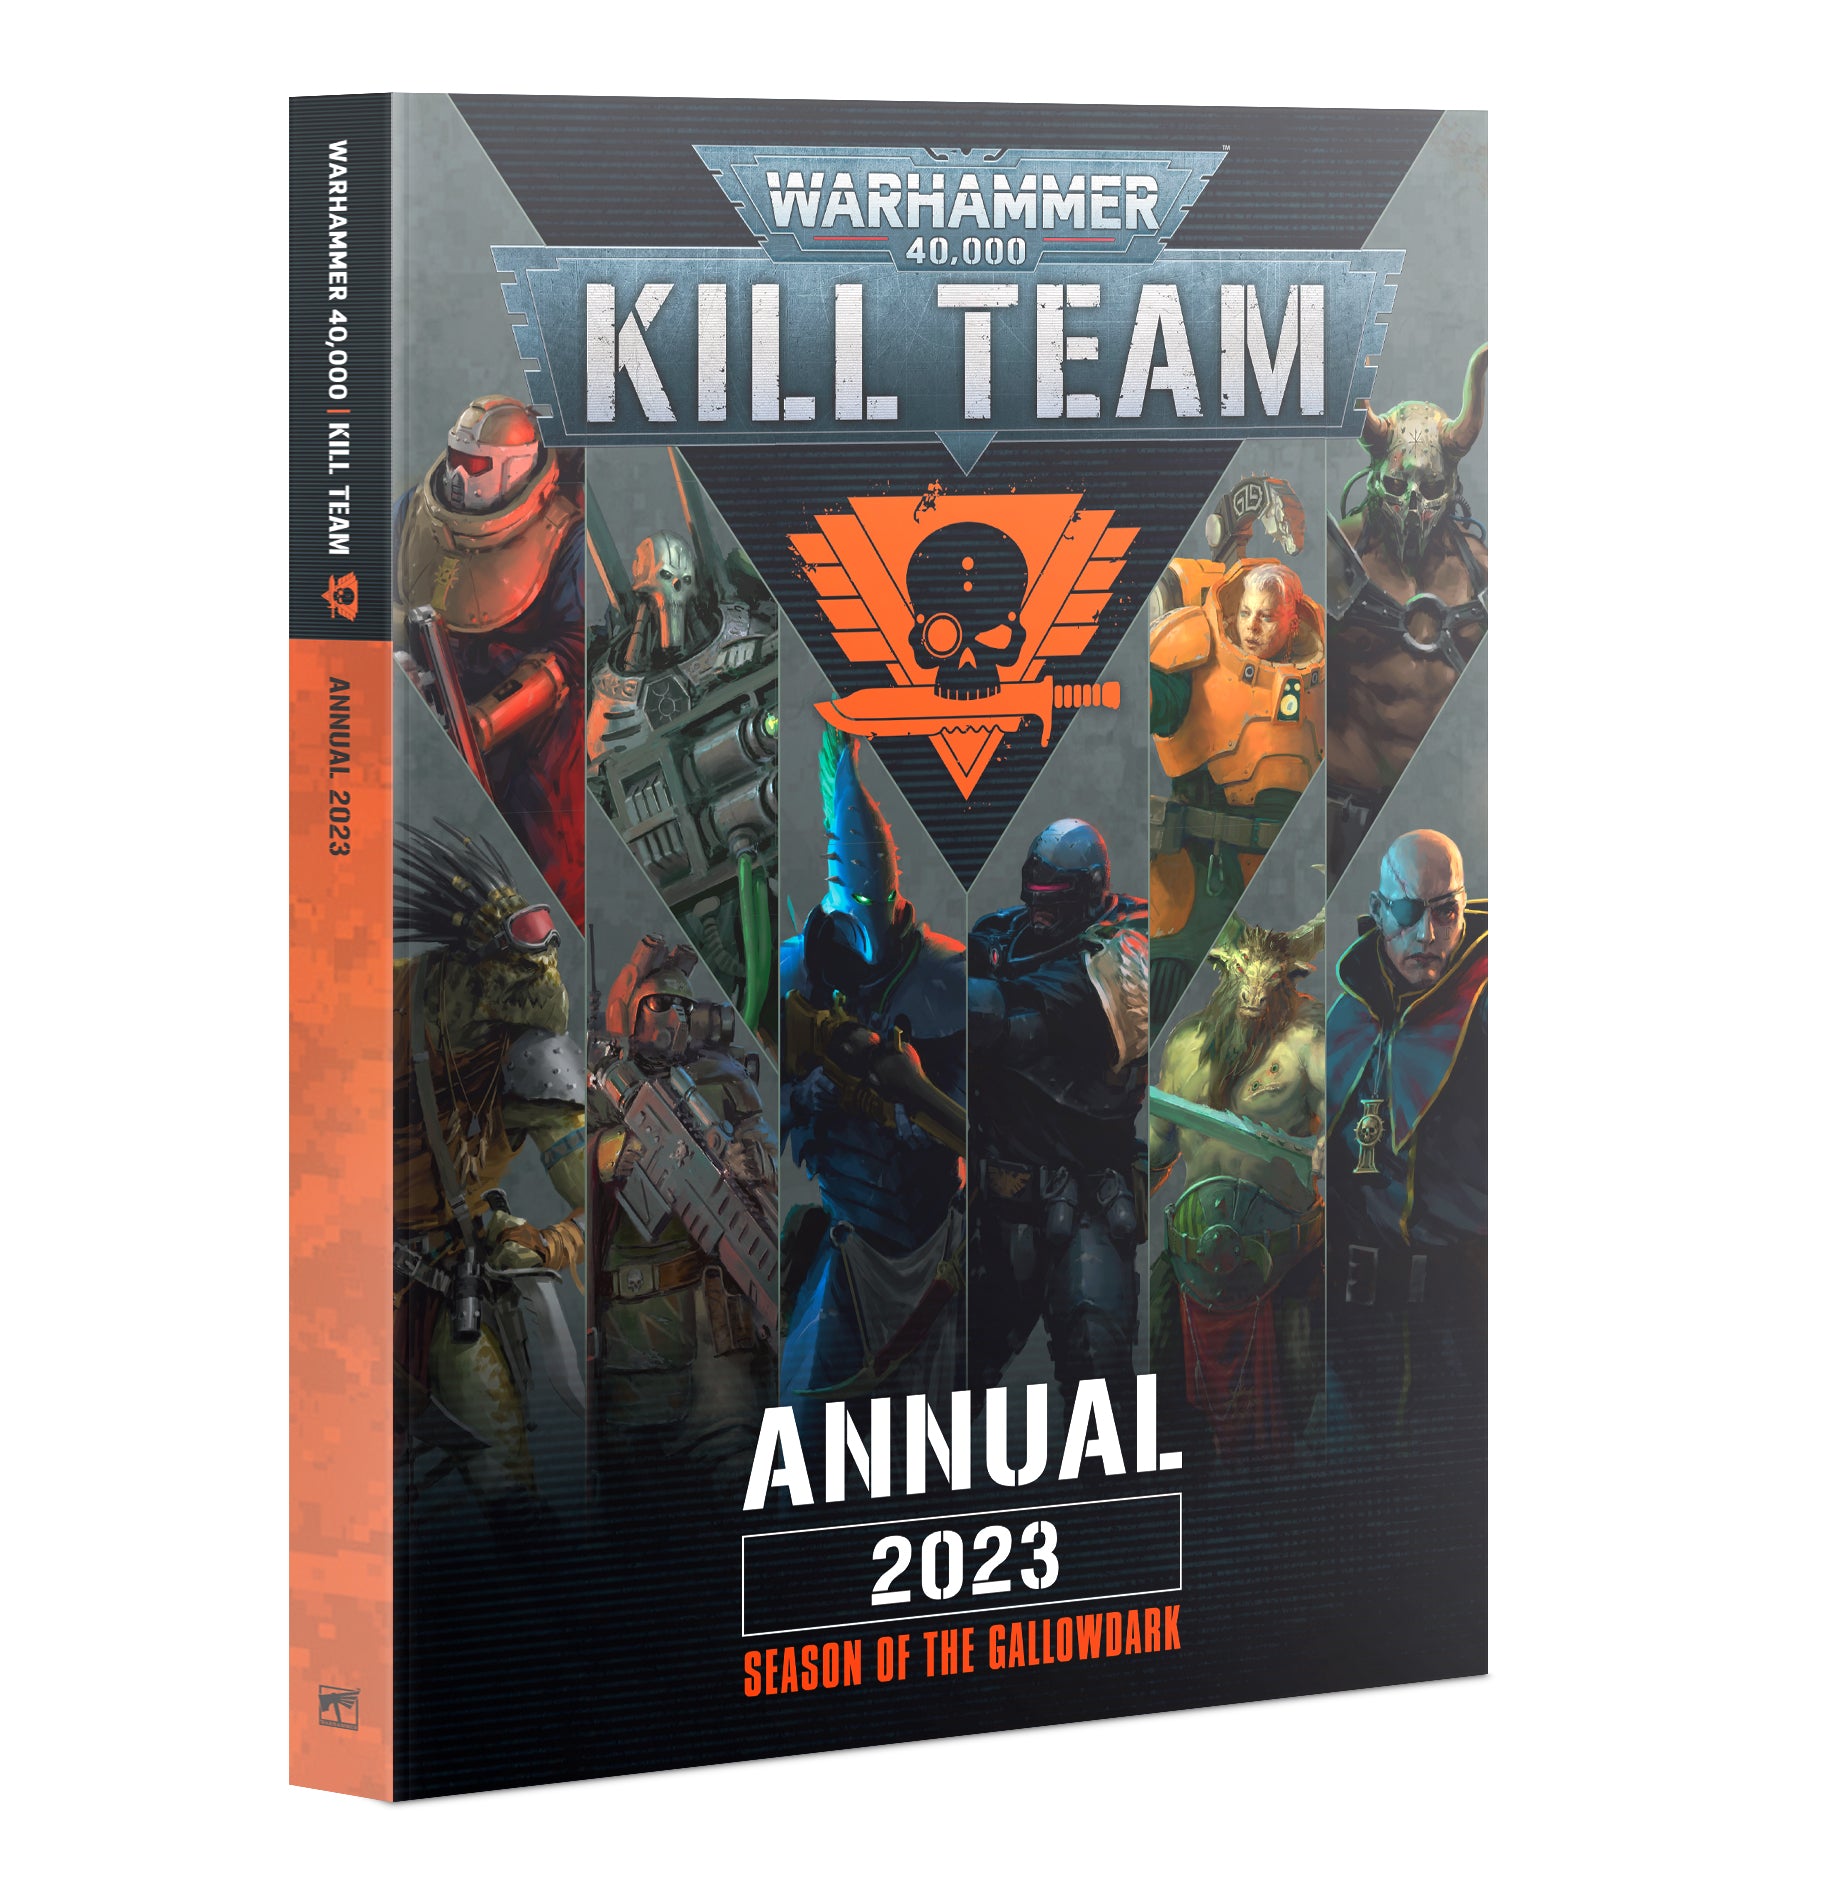 a book cover for a game called kill team